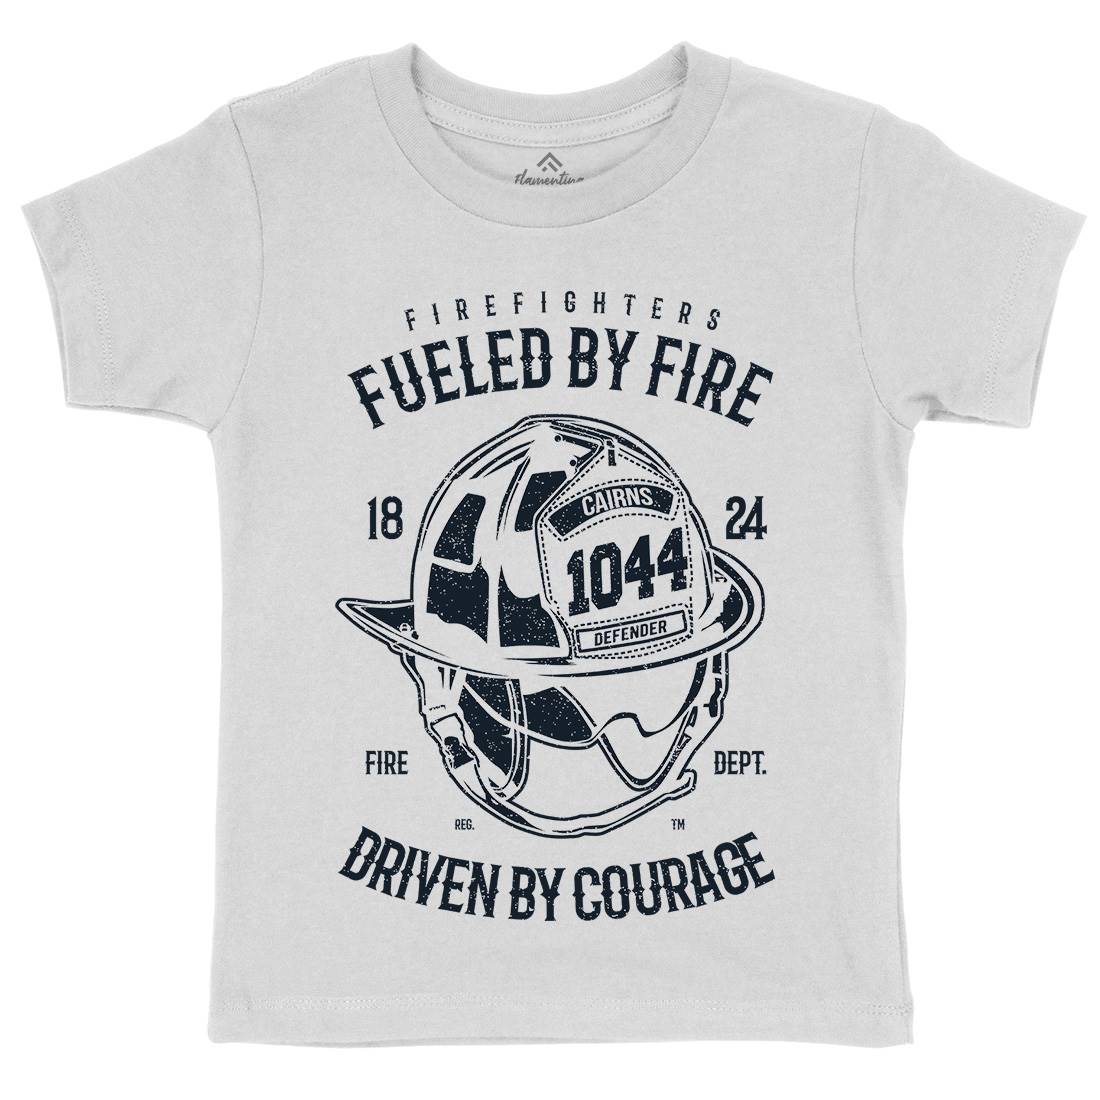 Fuelled By Fire Kids Organic Crew Neck T-Shirt Firefighters A667